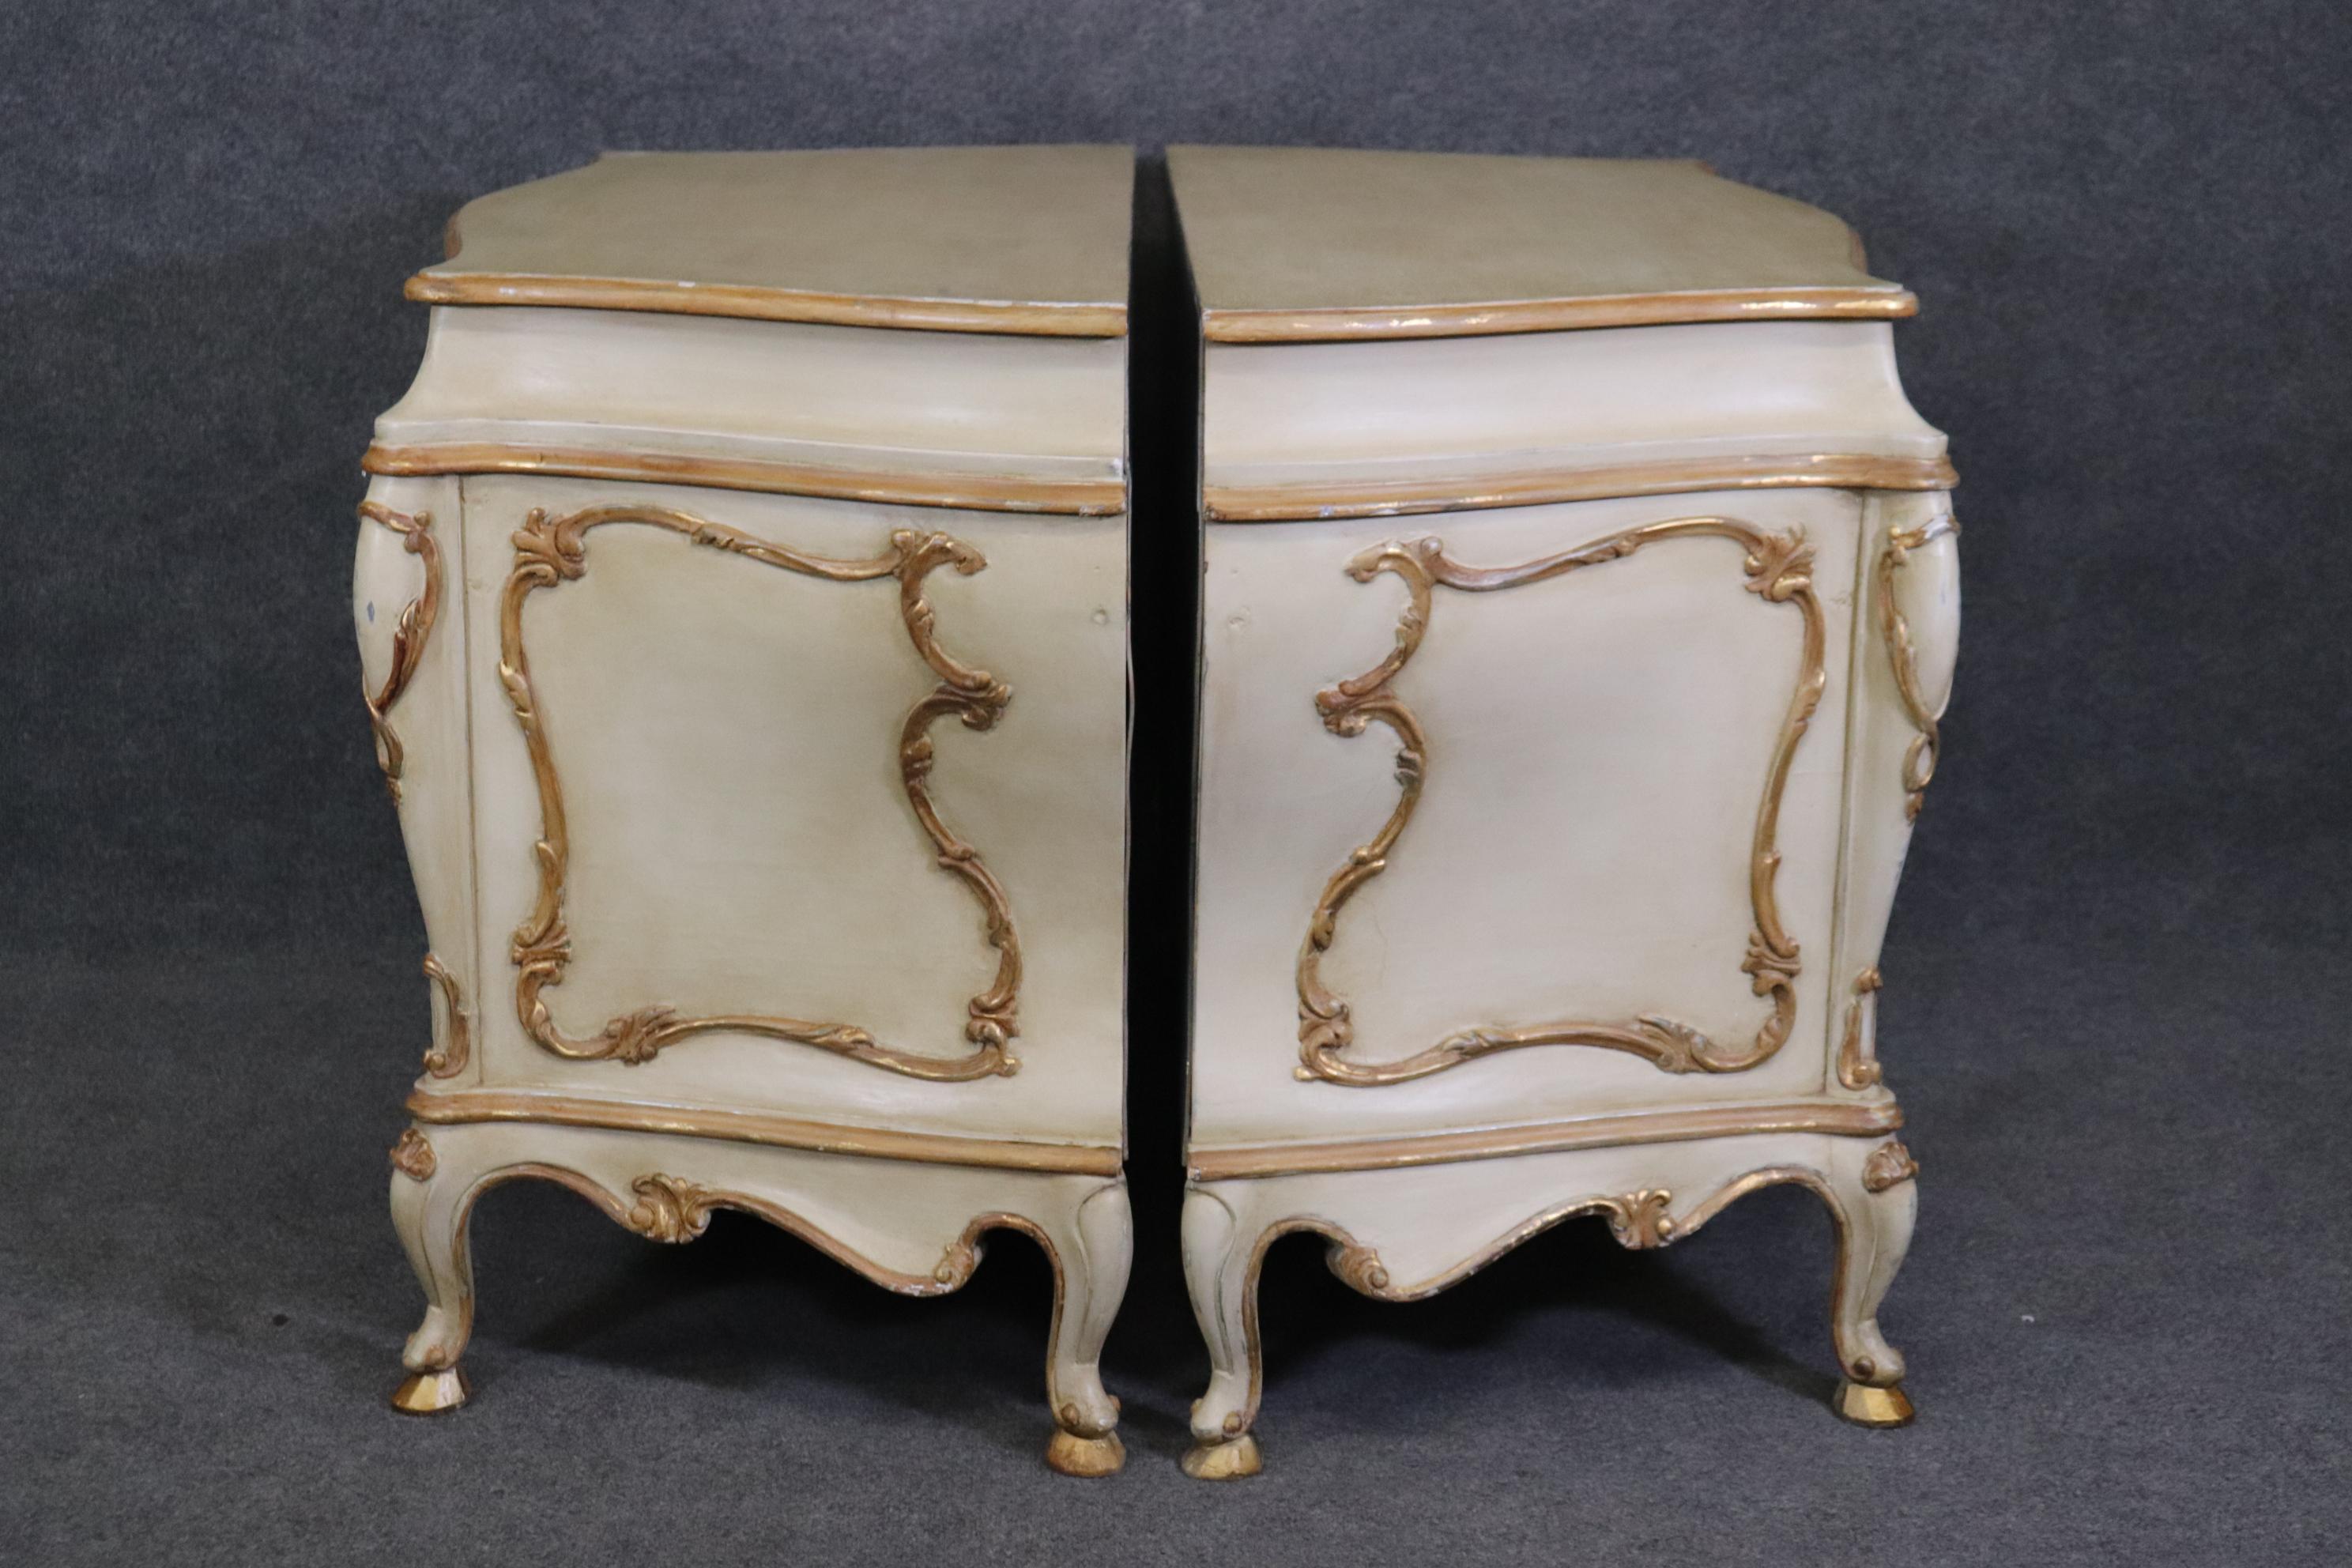 This is a gorgeous pair of antique white paint decorated commodes with gold accents. The pair is in good condition for their age and measure 49.25 wide x 22 deep x 32.25 tall. They date to the 1950s. 